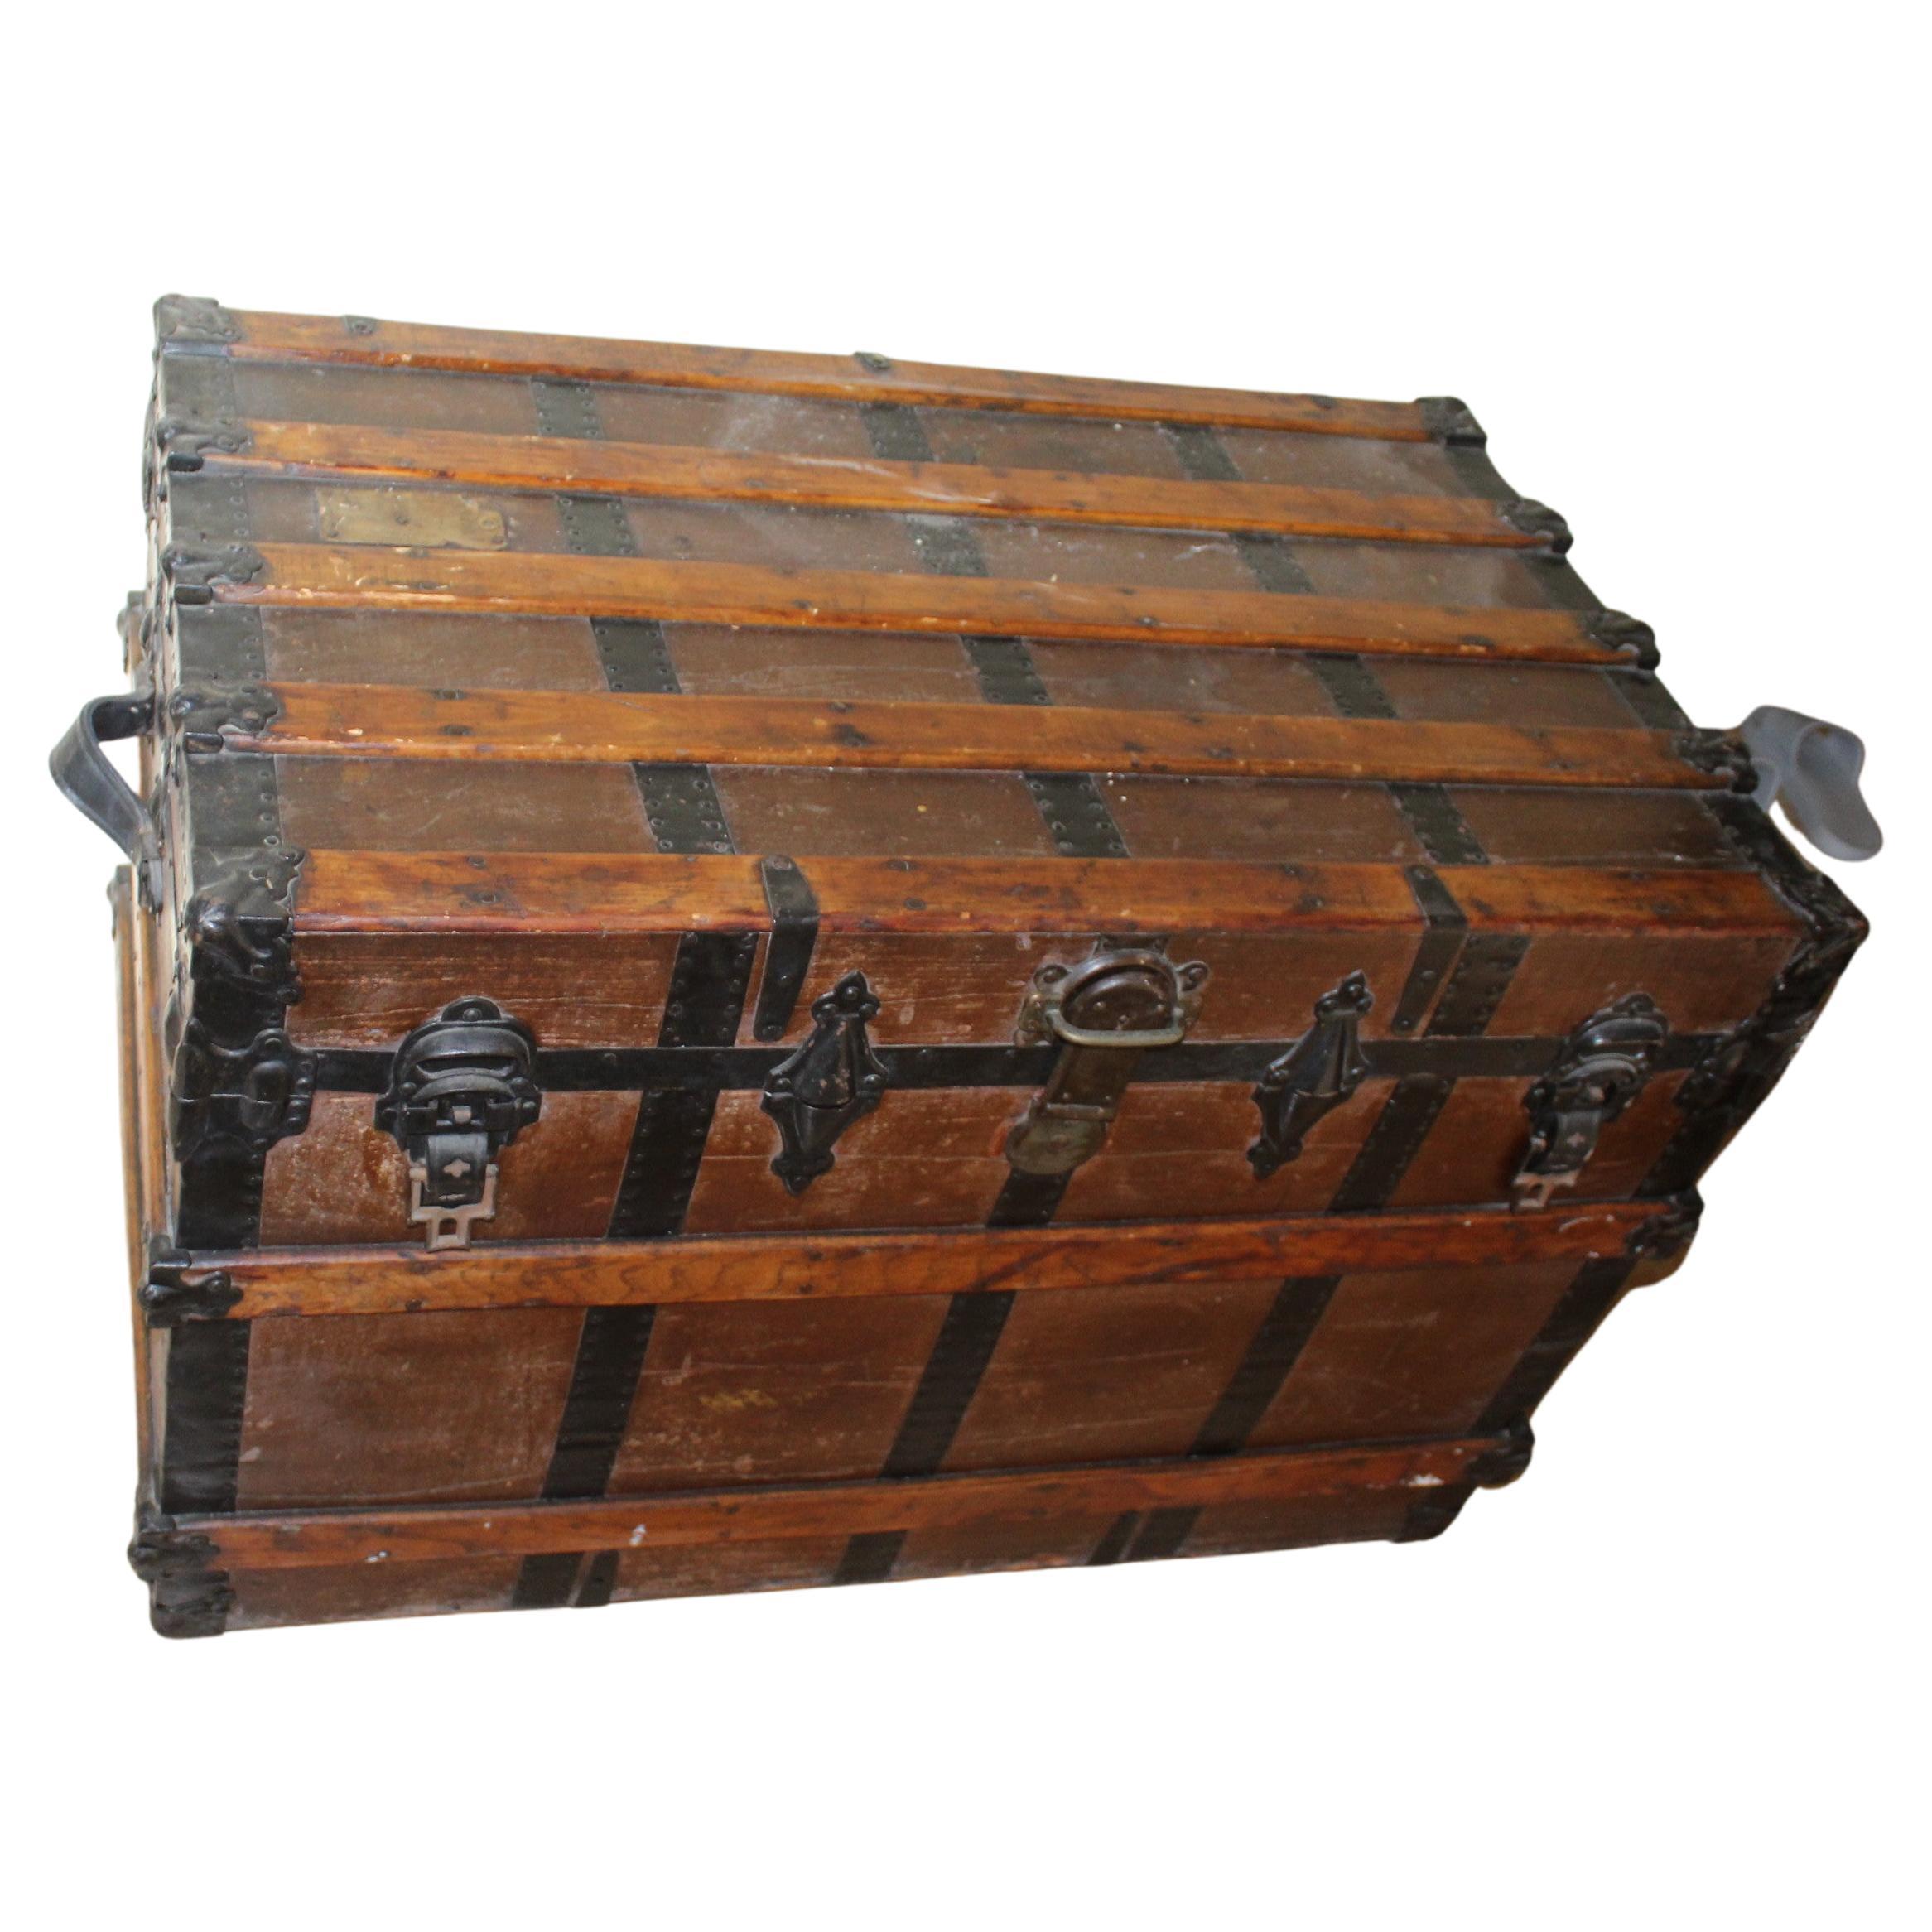 What do you line a steamer trunk with?